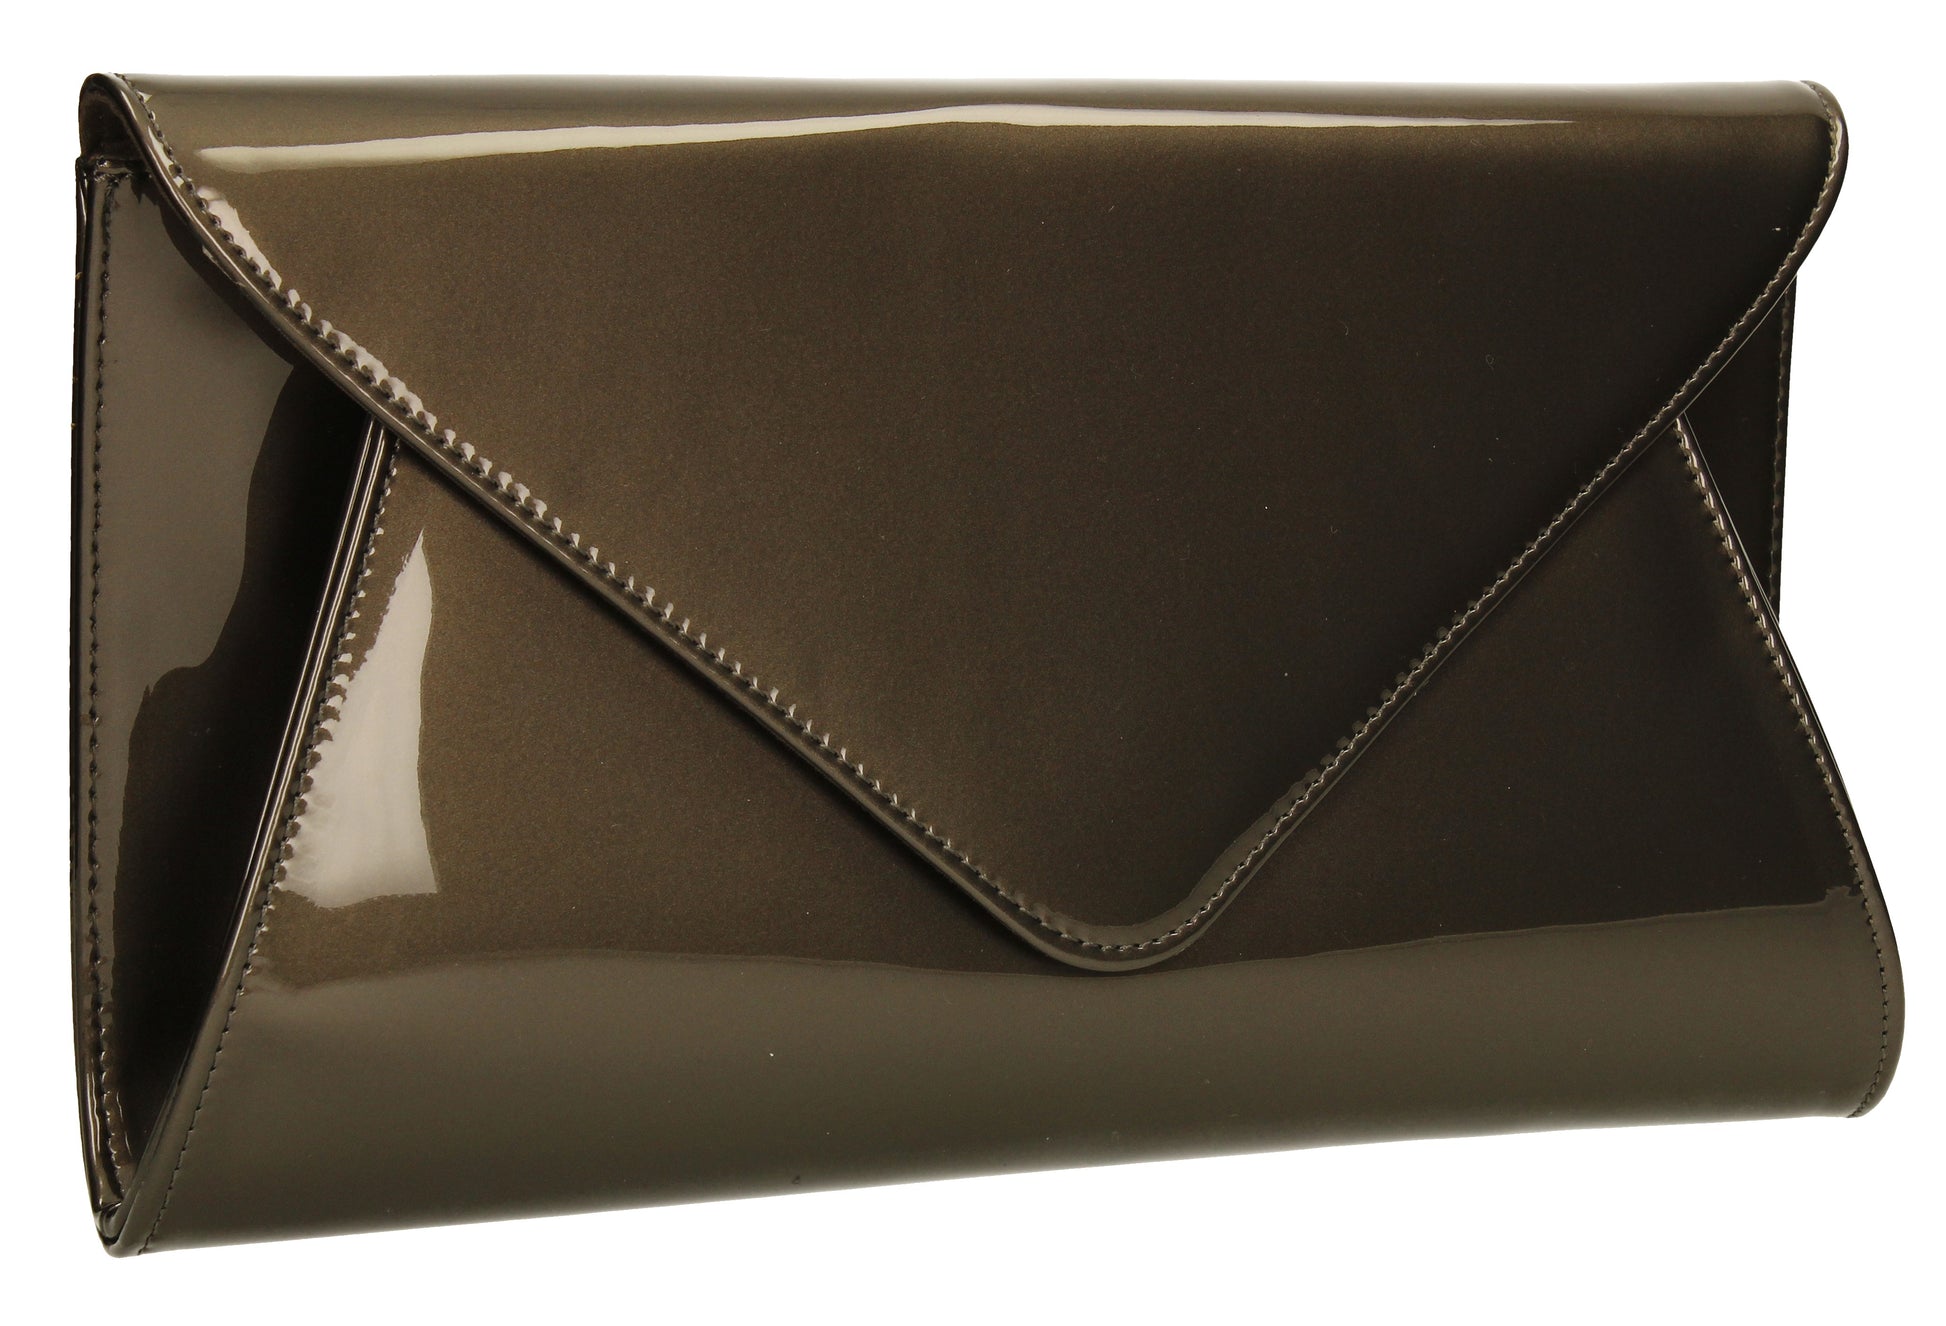 SWANKYSWANS Juliet Patent Envelope Clutch Bag Pewter Cute Cheap Clutch Bag For Weddings School and Work